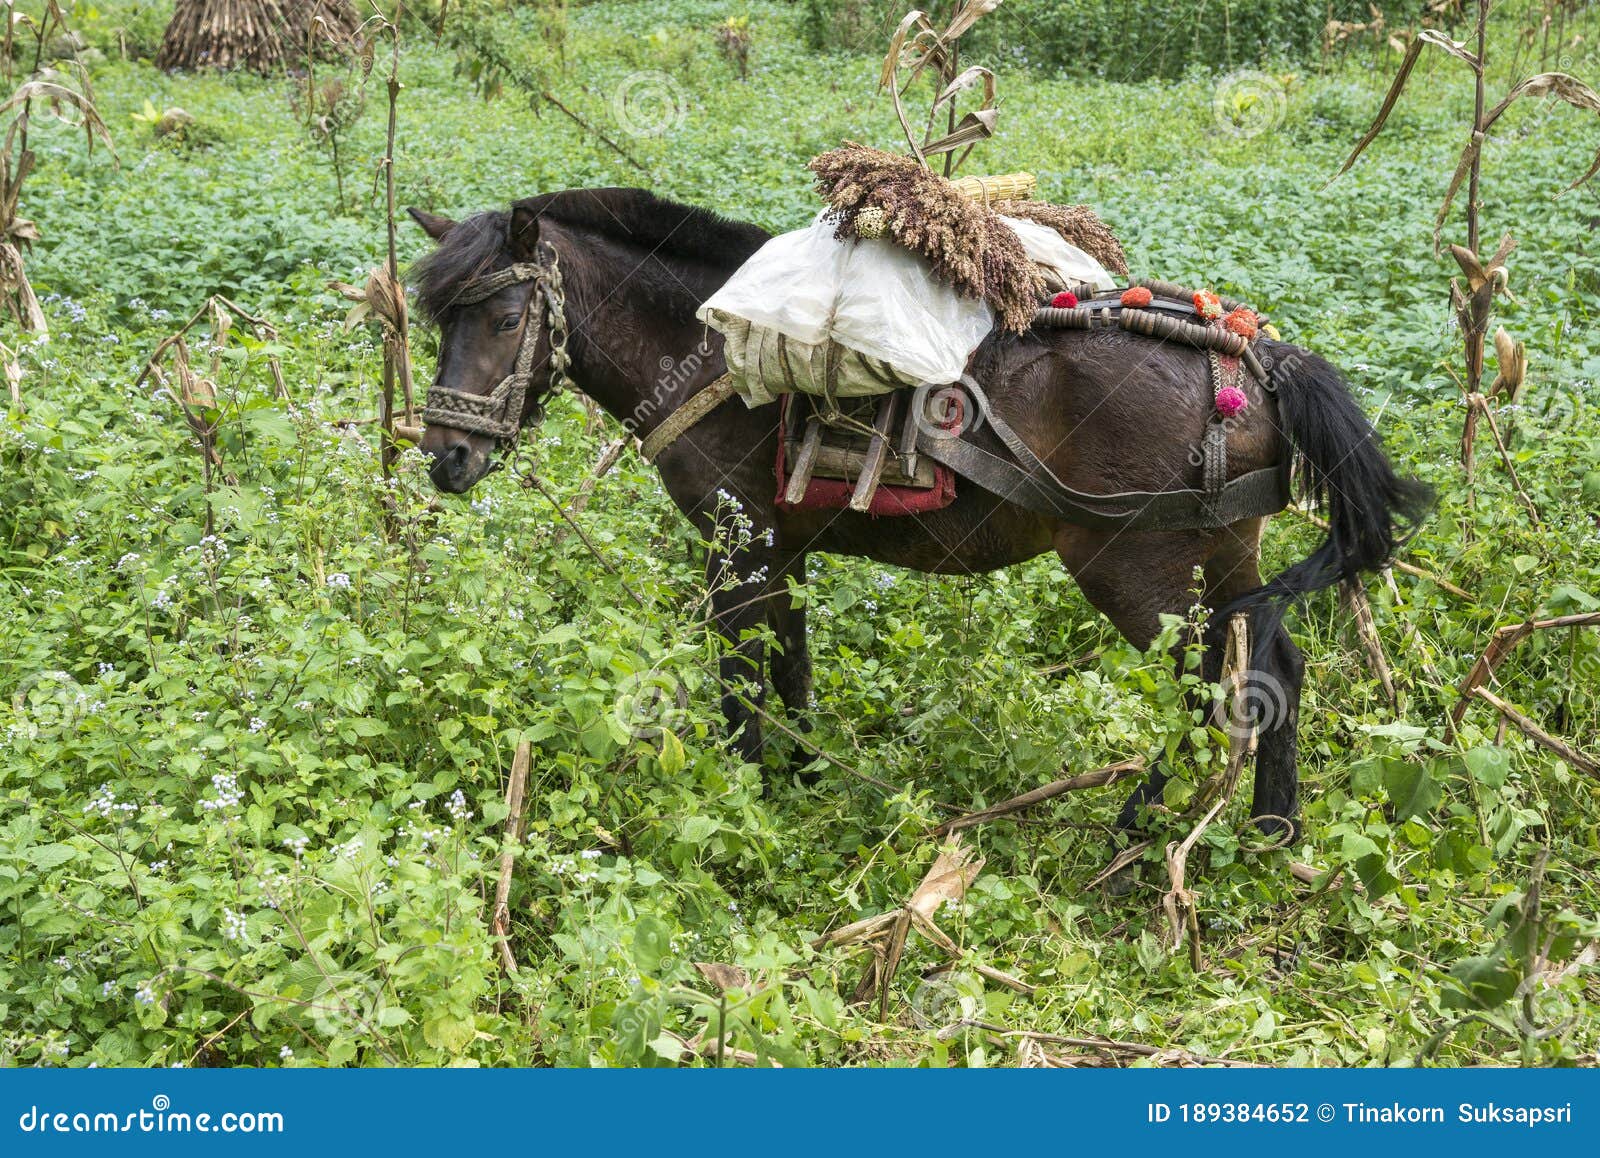 mule with cargo of hmong eating in field is a hybrid animal is popularly used as a vehicle for loading distinguishing feature of